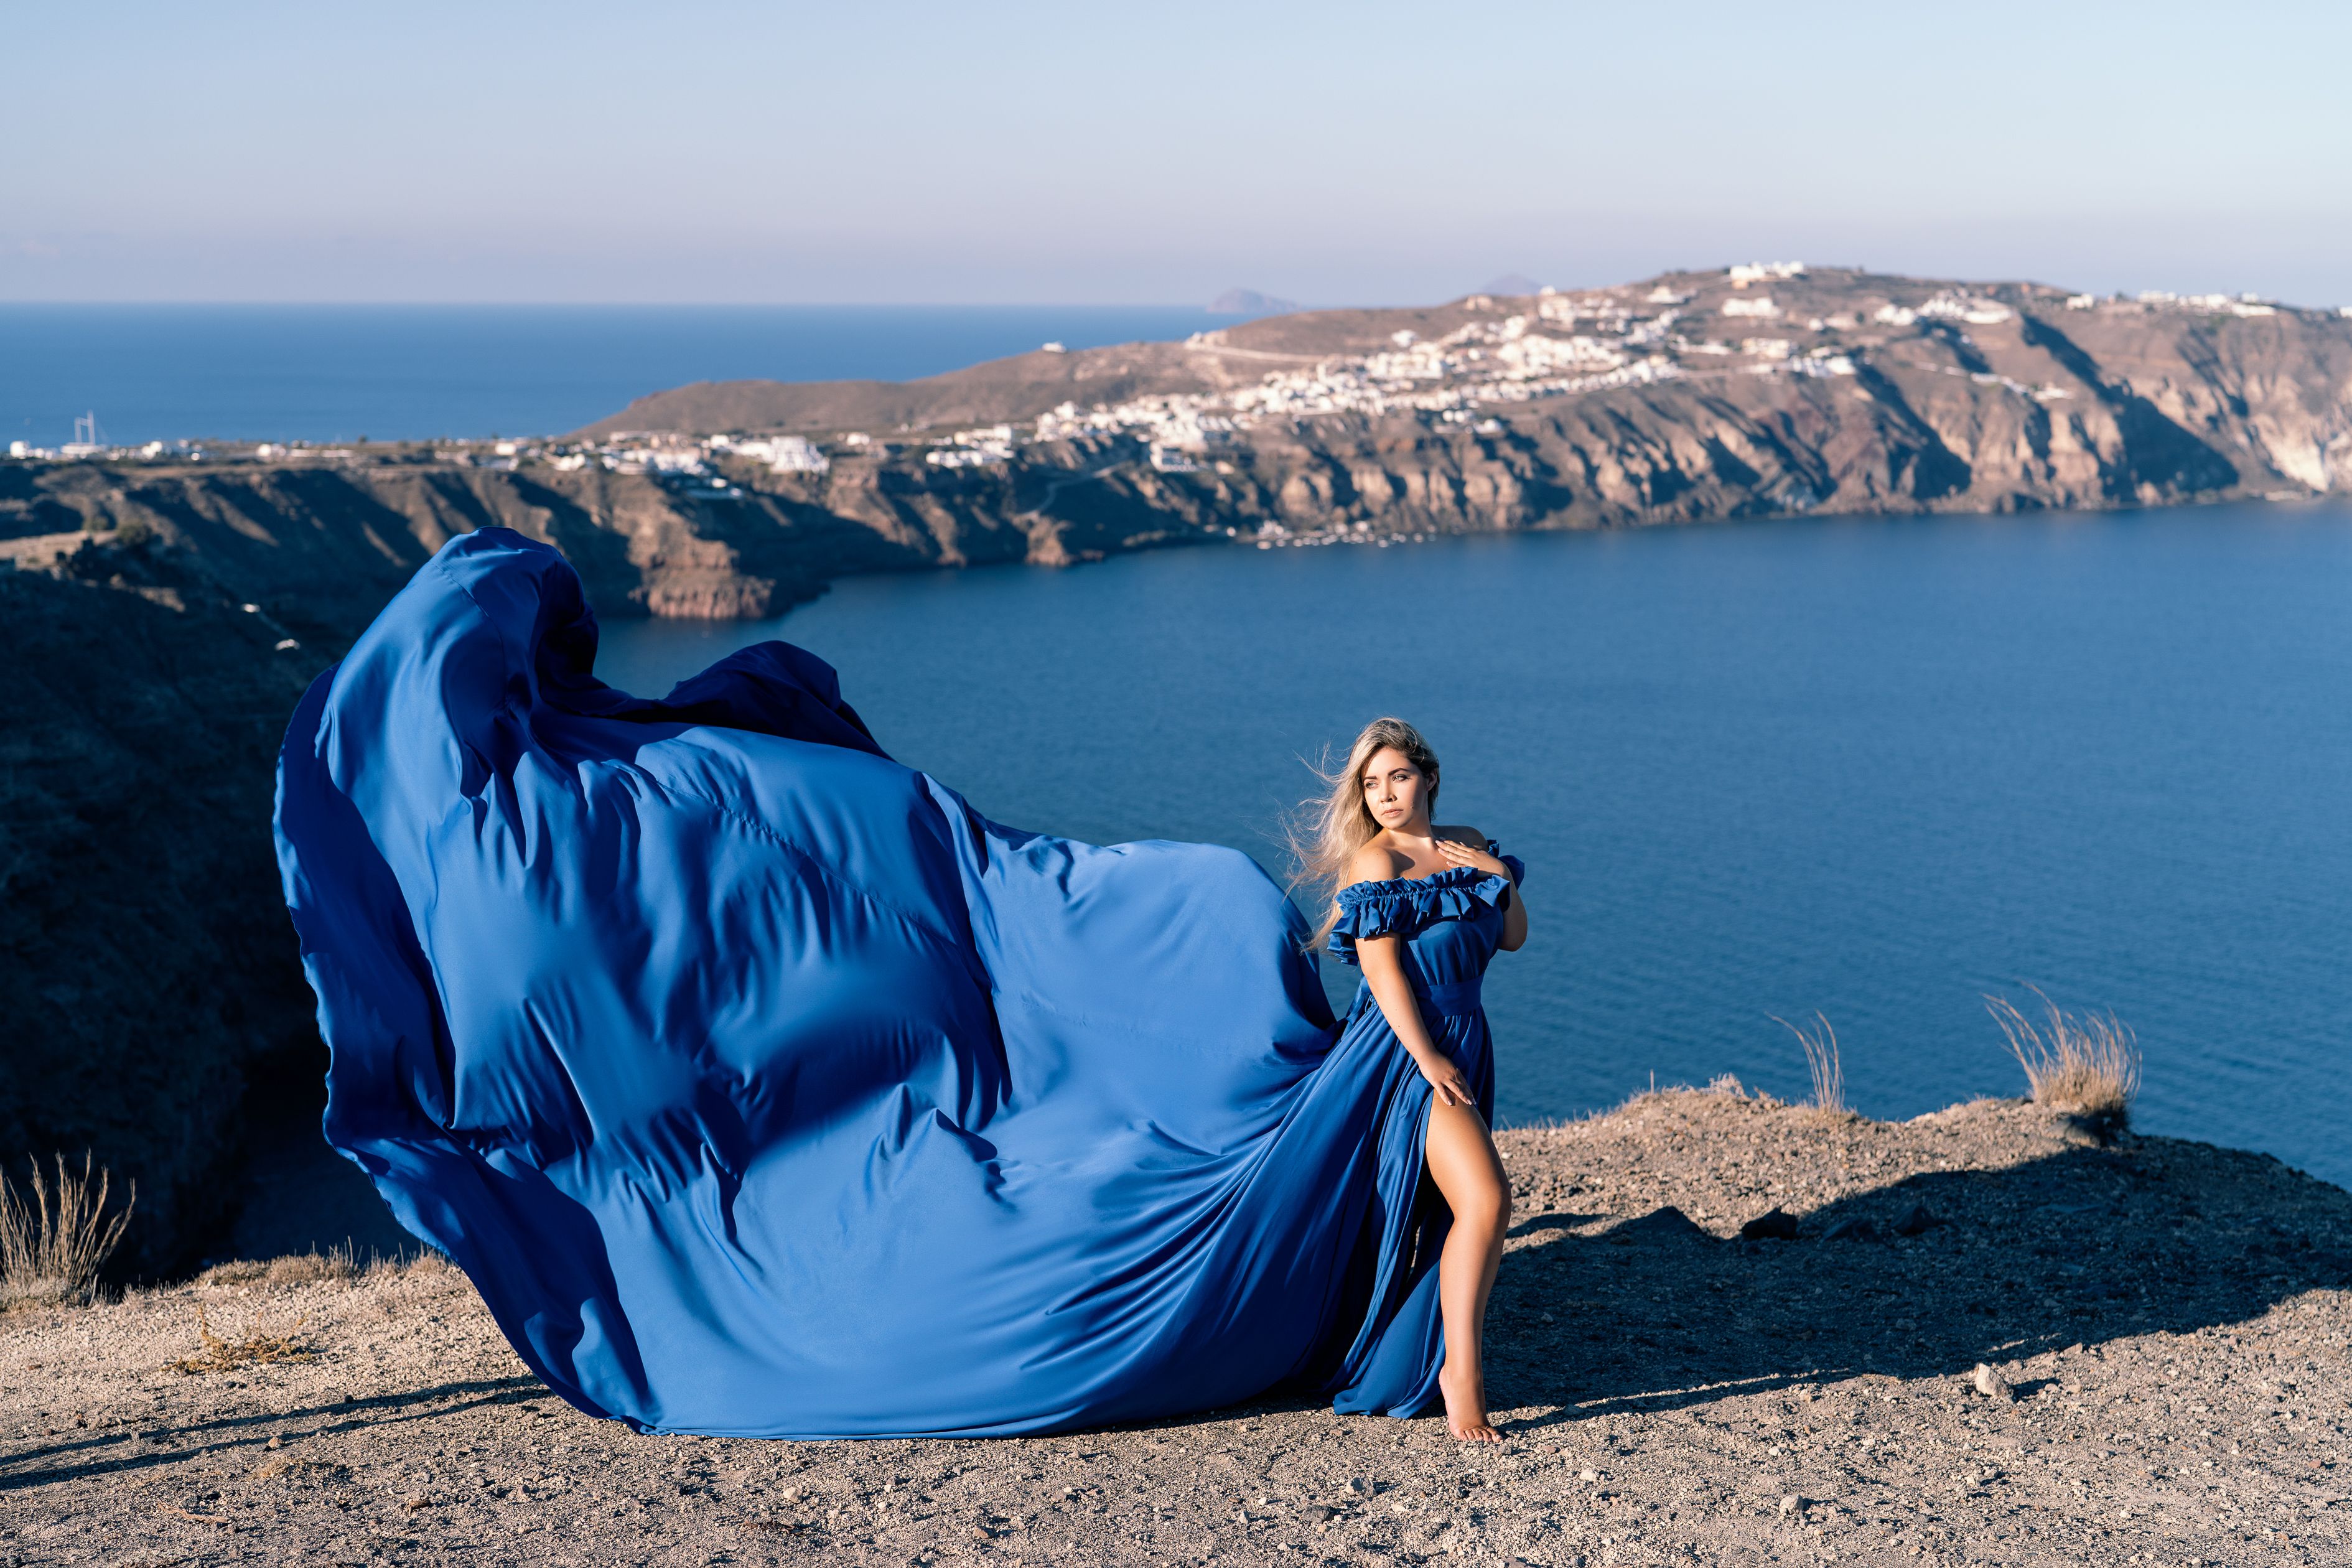 Photoshoot in Megalochori with a royal blue Flying Santorini dress